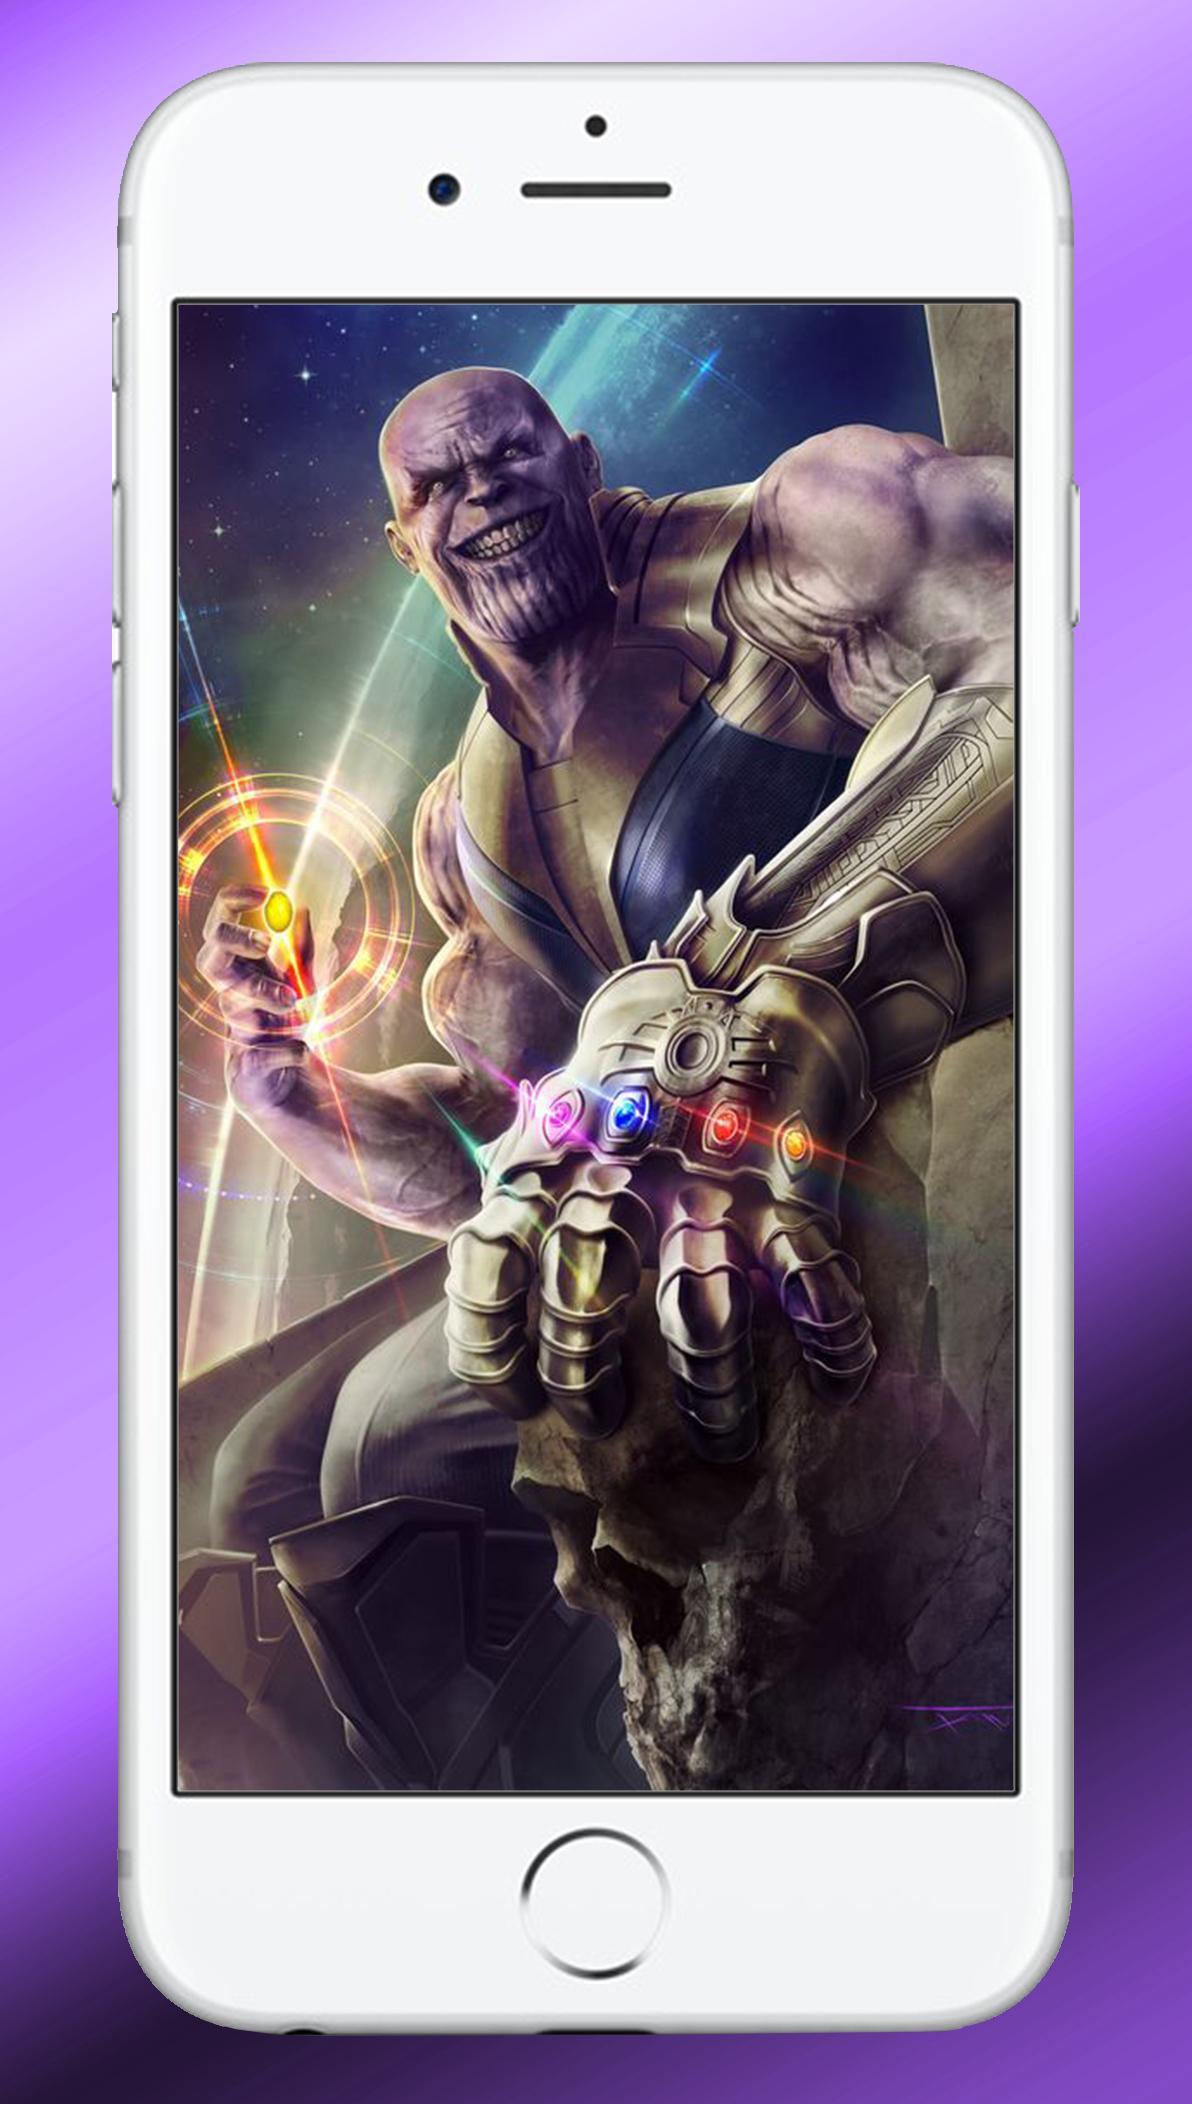 Avengers Infinity War Hd Wallpapers 18 For Android Apk Download